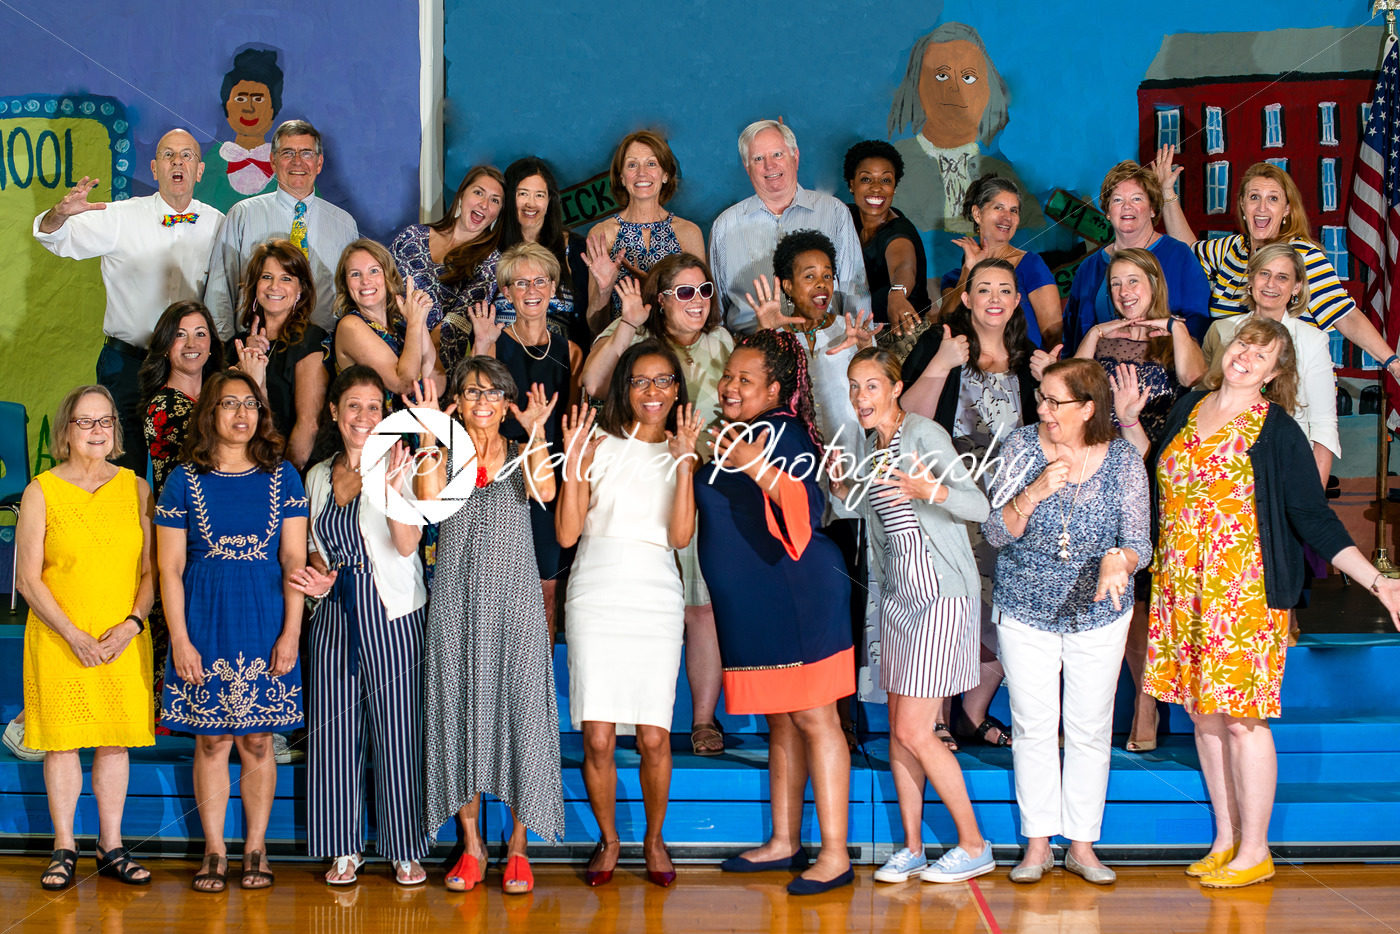 ROSEMONT, PA – MAY 31, 2019: The Agnes Irwin School Lower School Staff - Kelleher Photography Store